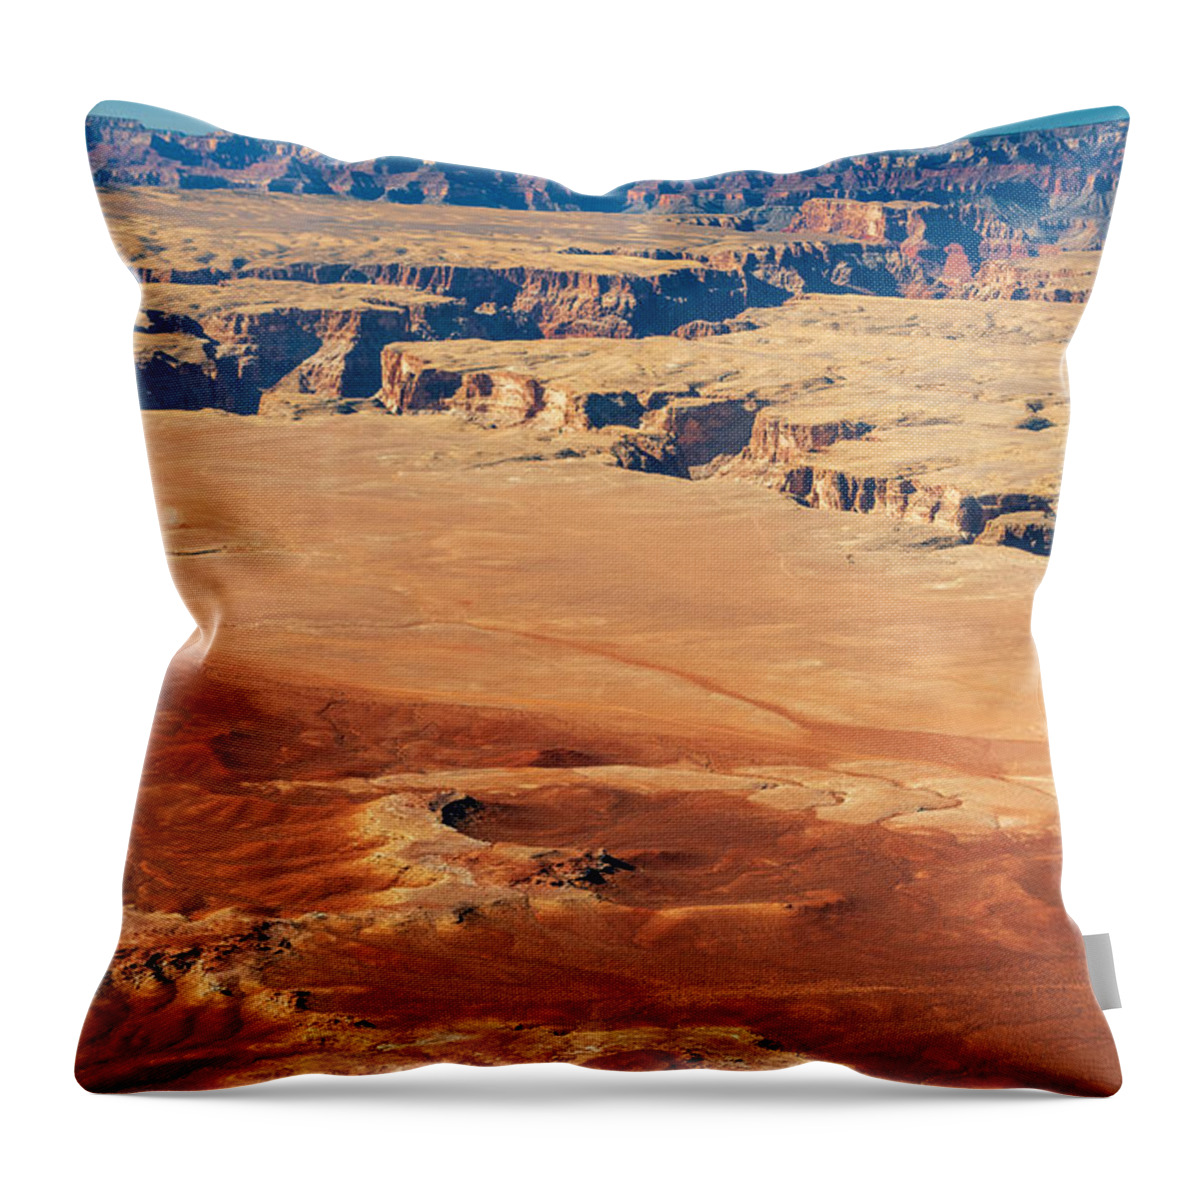 Painted Desert Vermillion Cliffs Arizona Landscape Red Sand Formations Marble Canyon Throw Pillow featuring the photograph Marble Canyon and the Painted Desert by Geno Lee